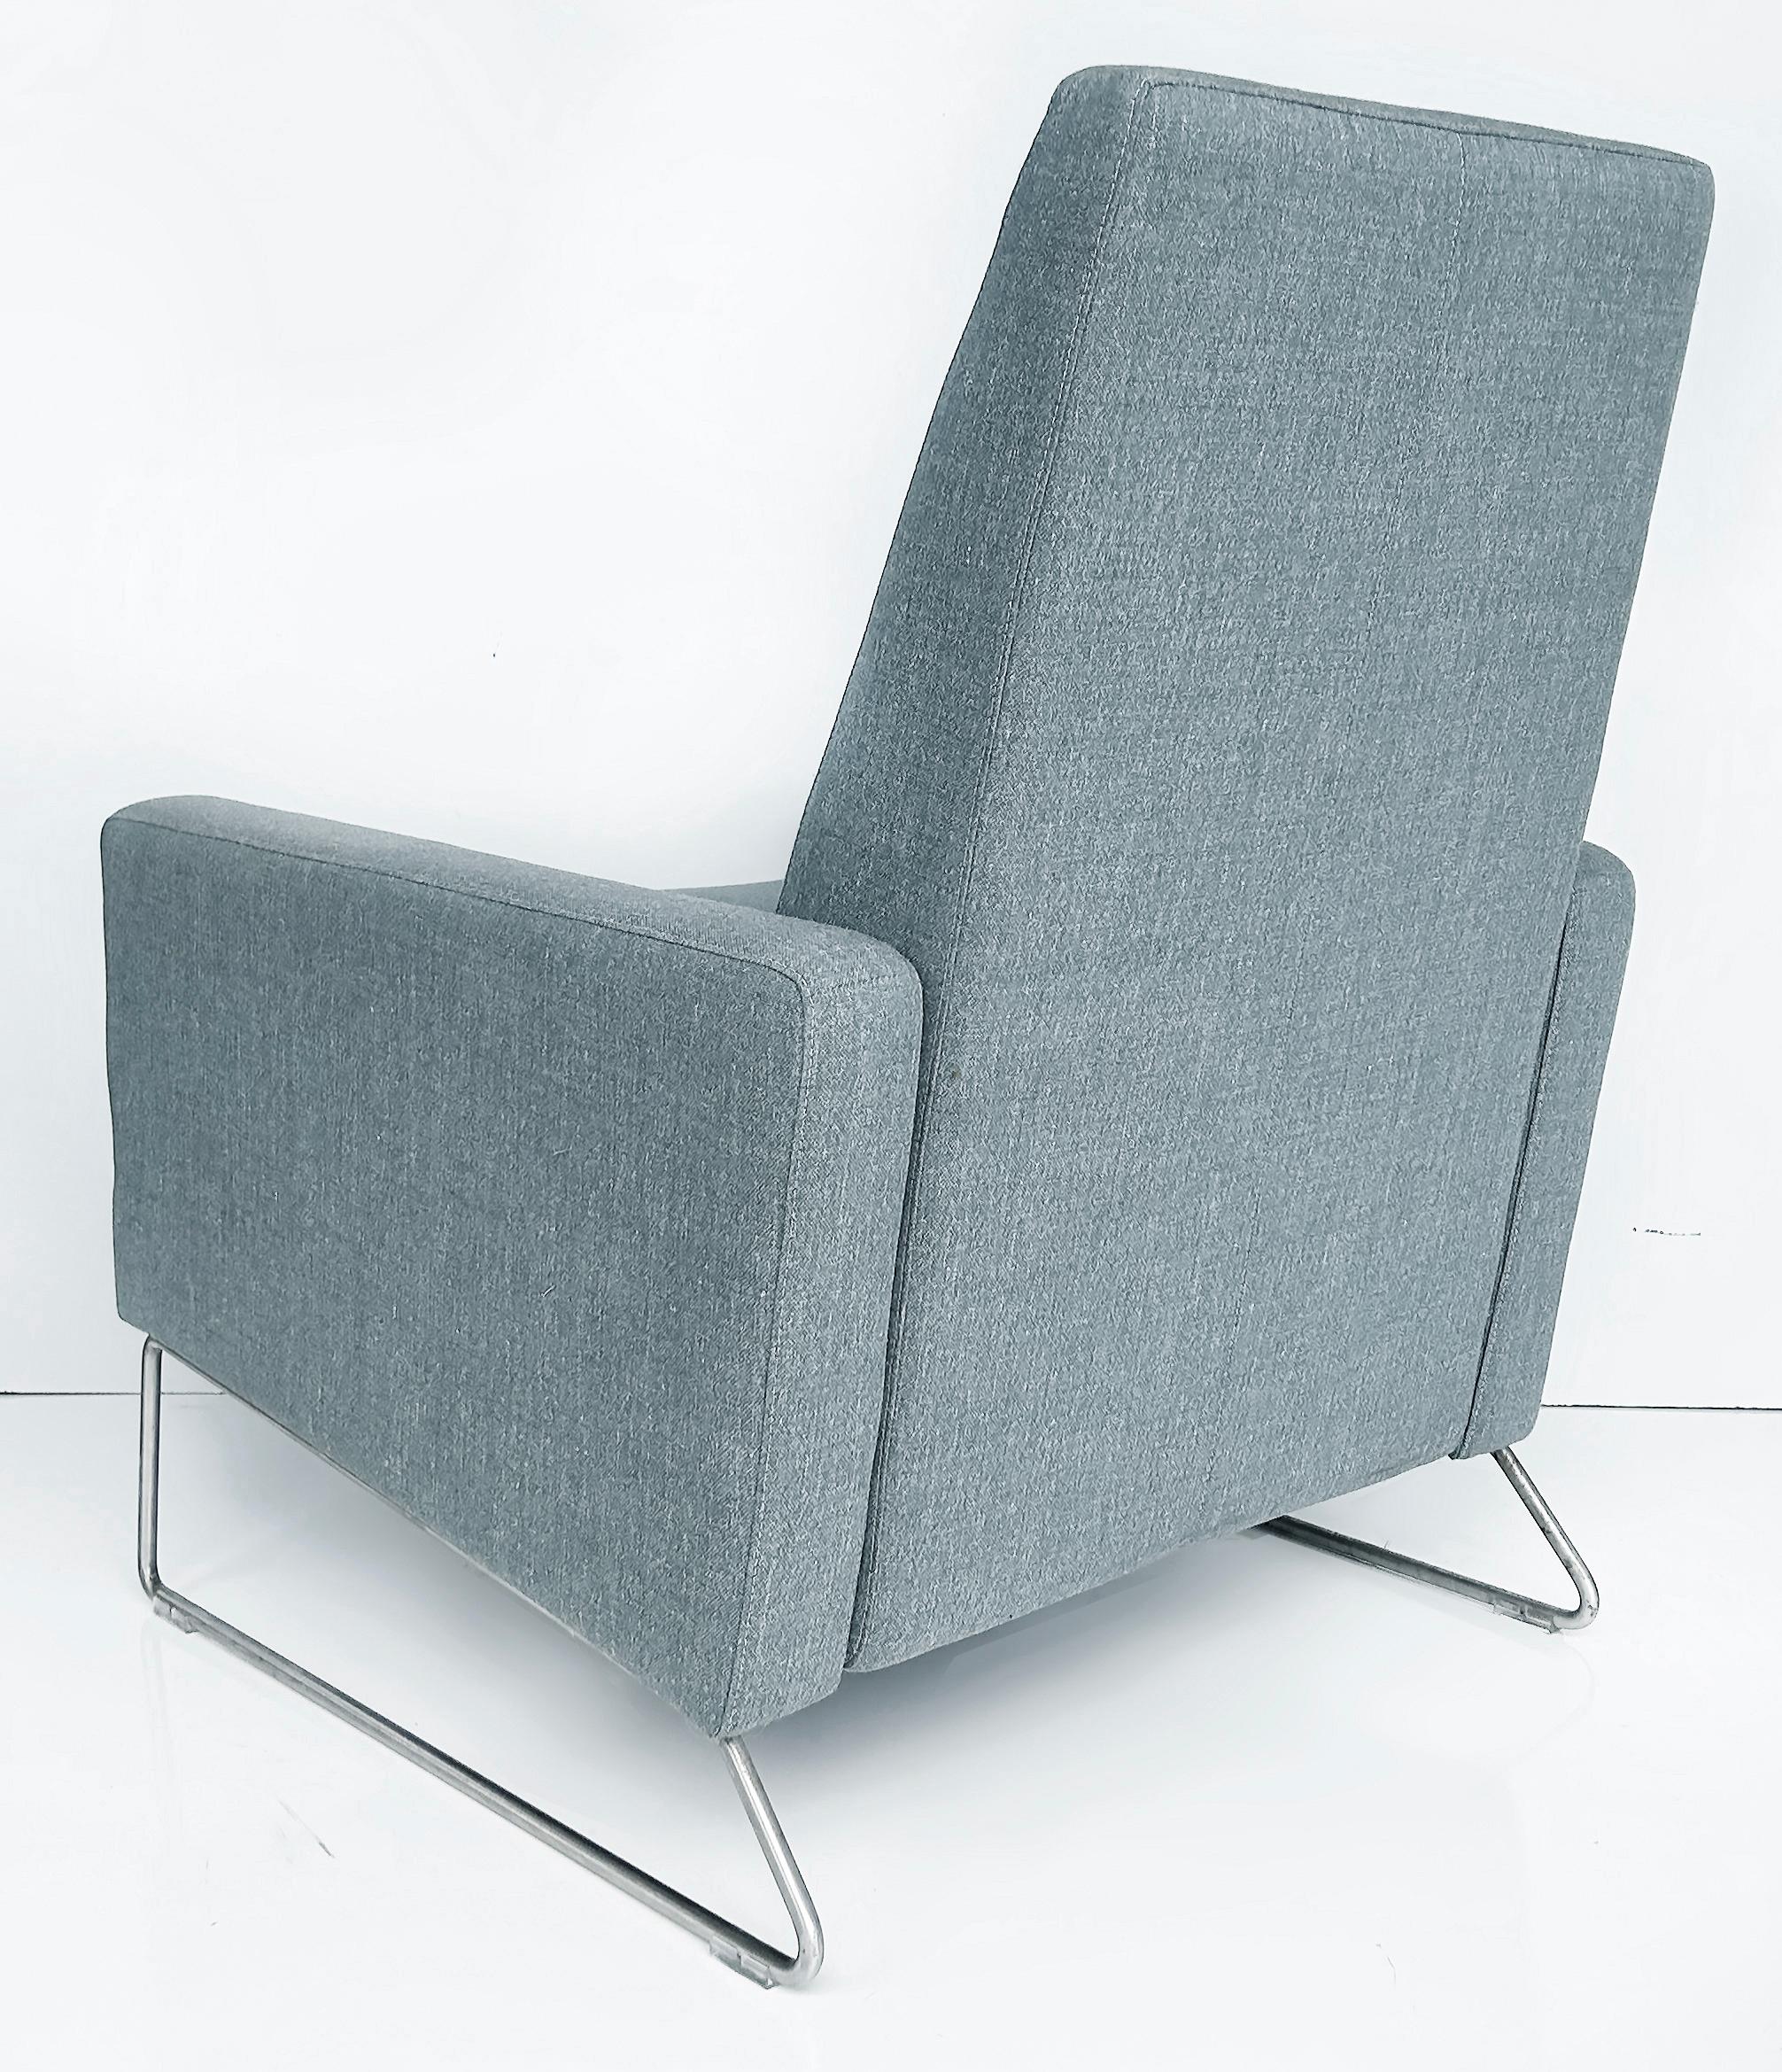 Contemporary Design Within Reach Flight Recliner, Stainless Steel and Linen Fabric